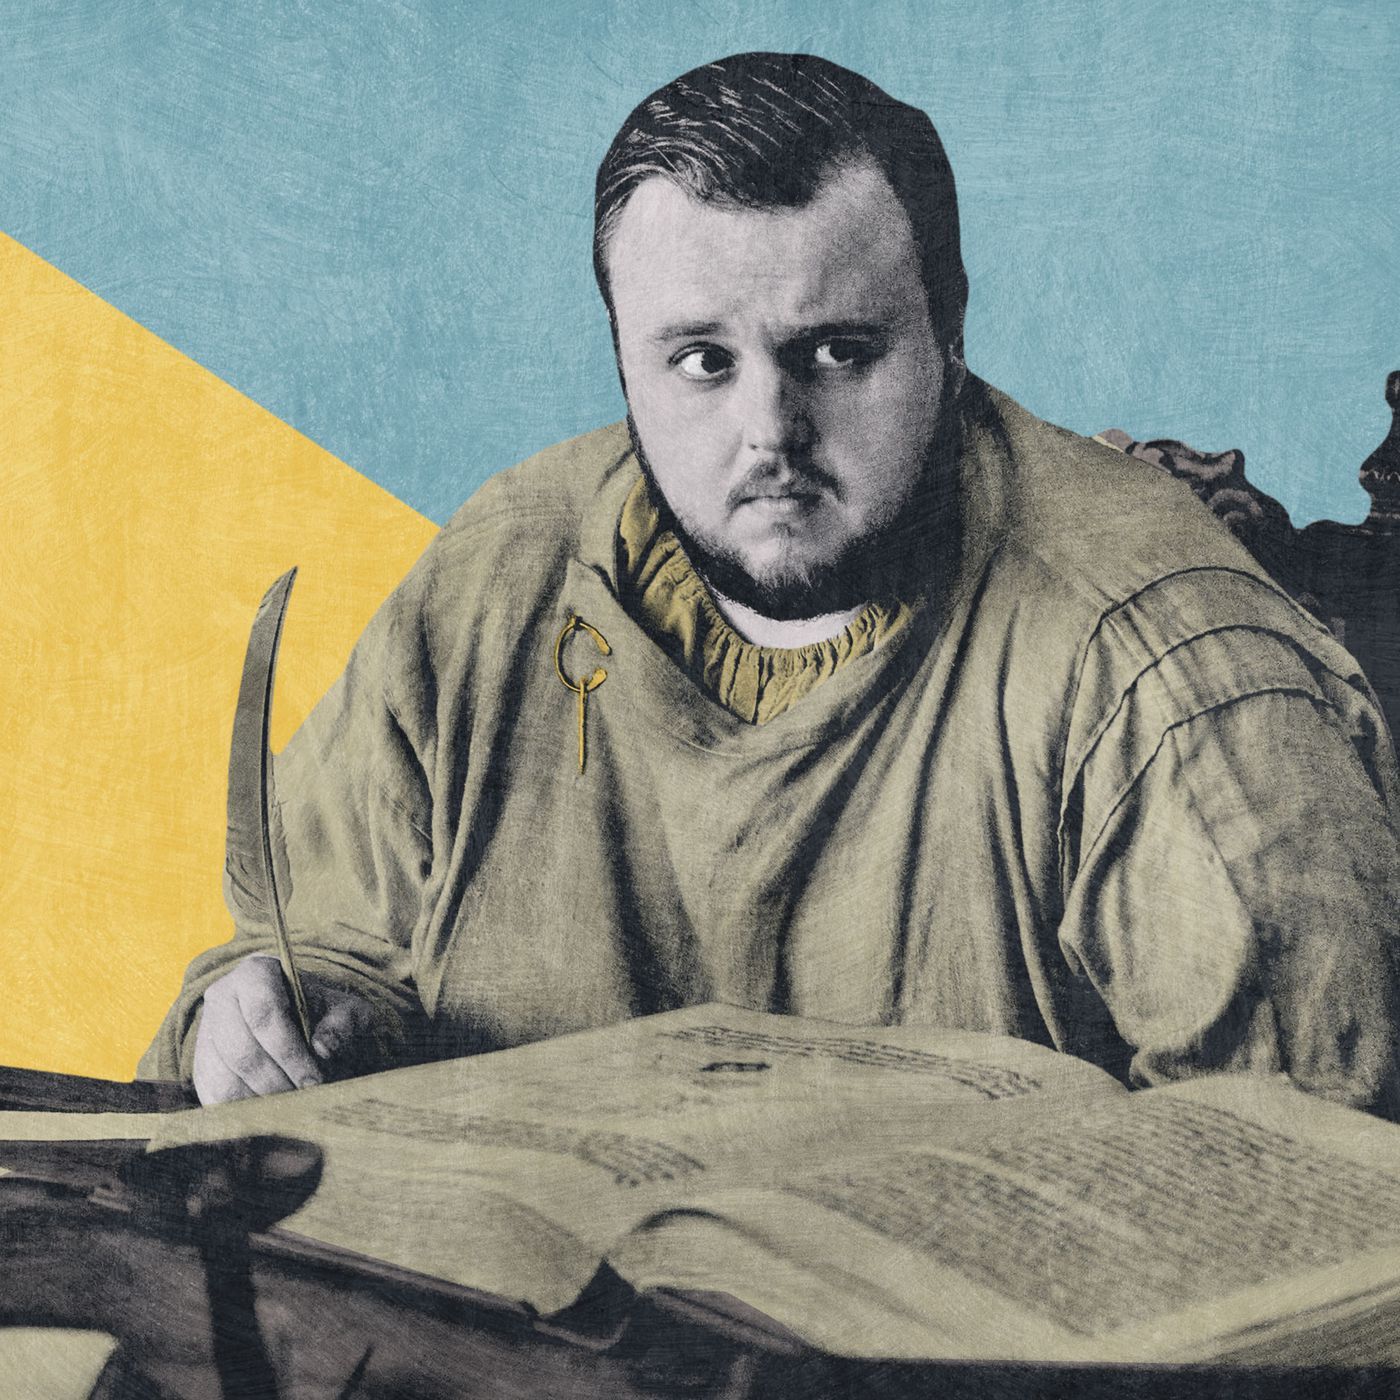 Game of Thrones' Season 8: What's in Sam and Gilly's Citadel Books